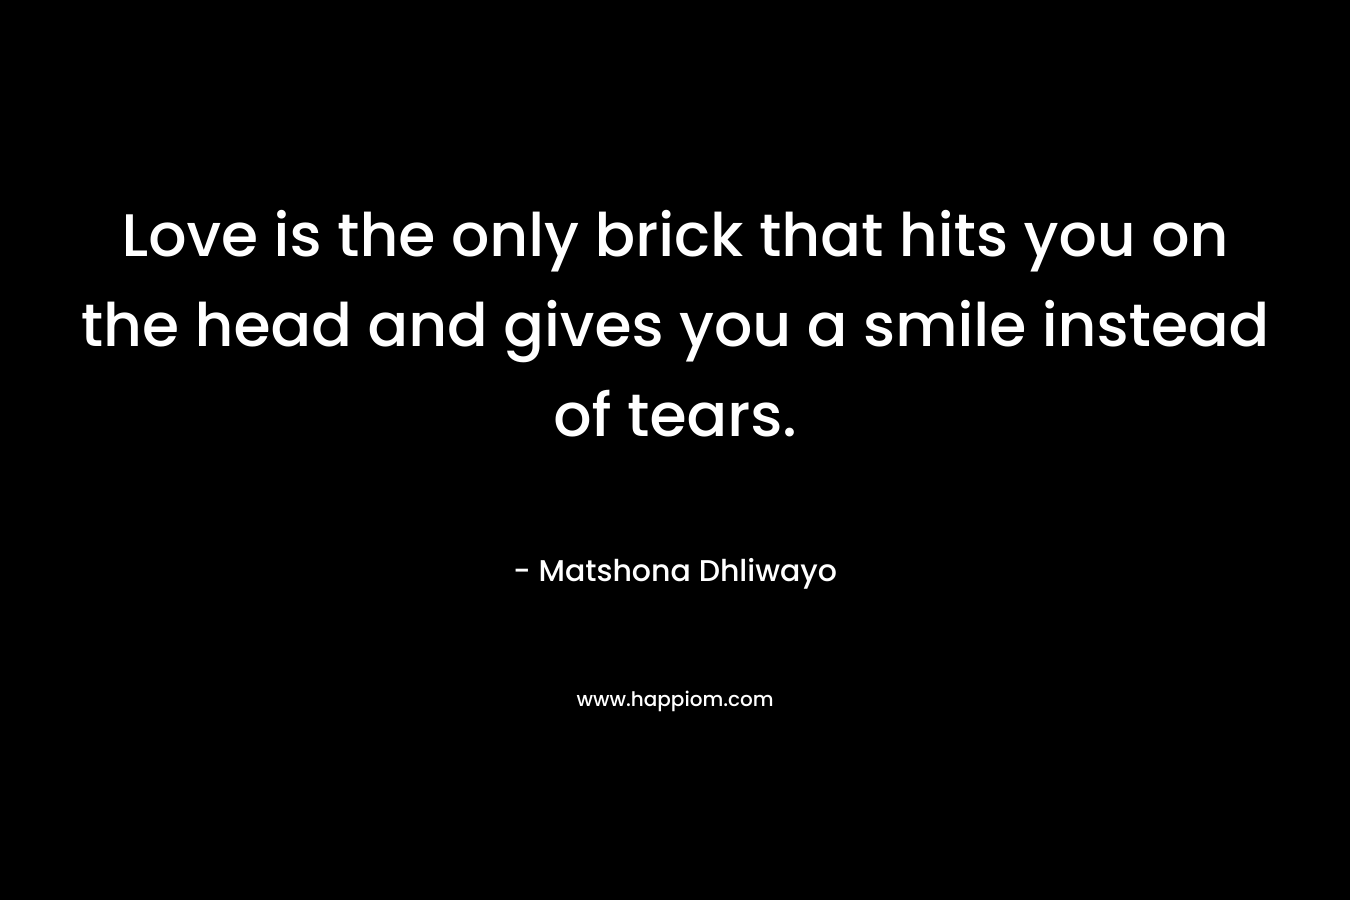 Love is the only brick that hits you on the head and gives you a smile instead of tears.